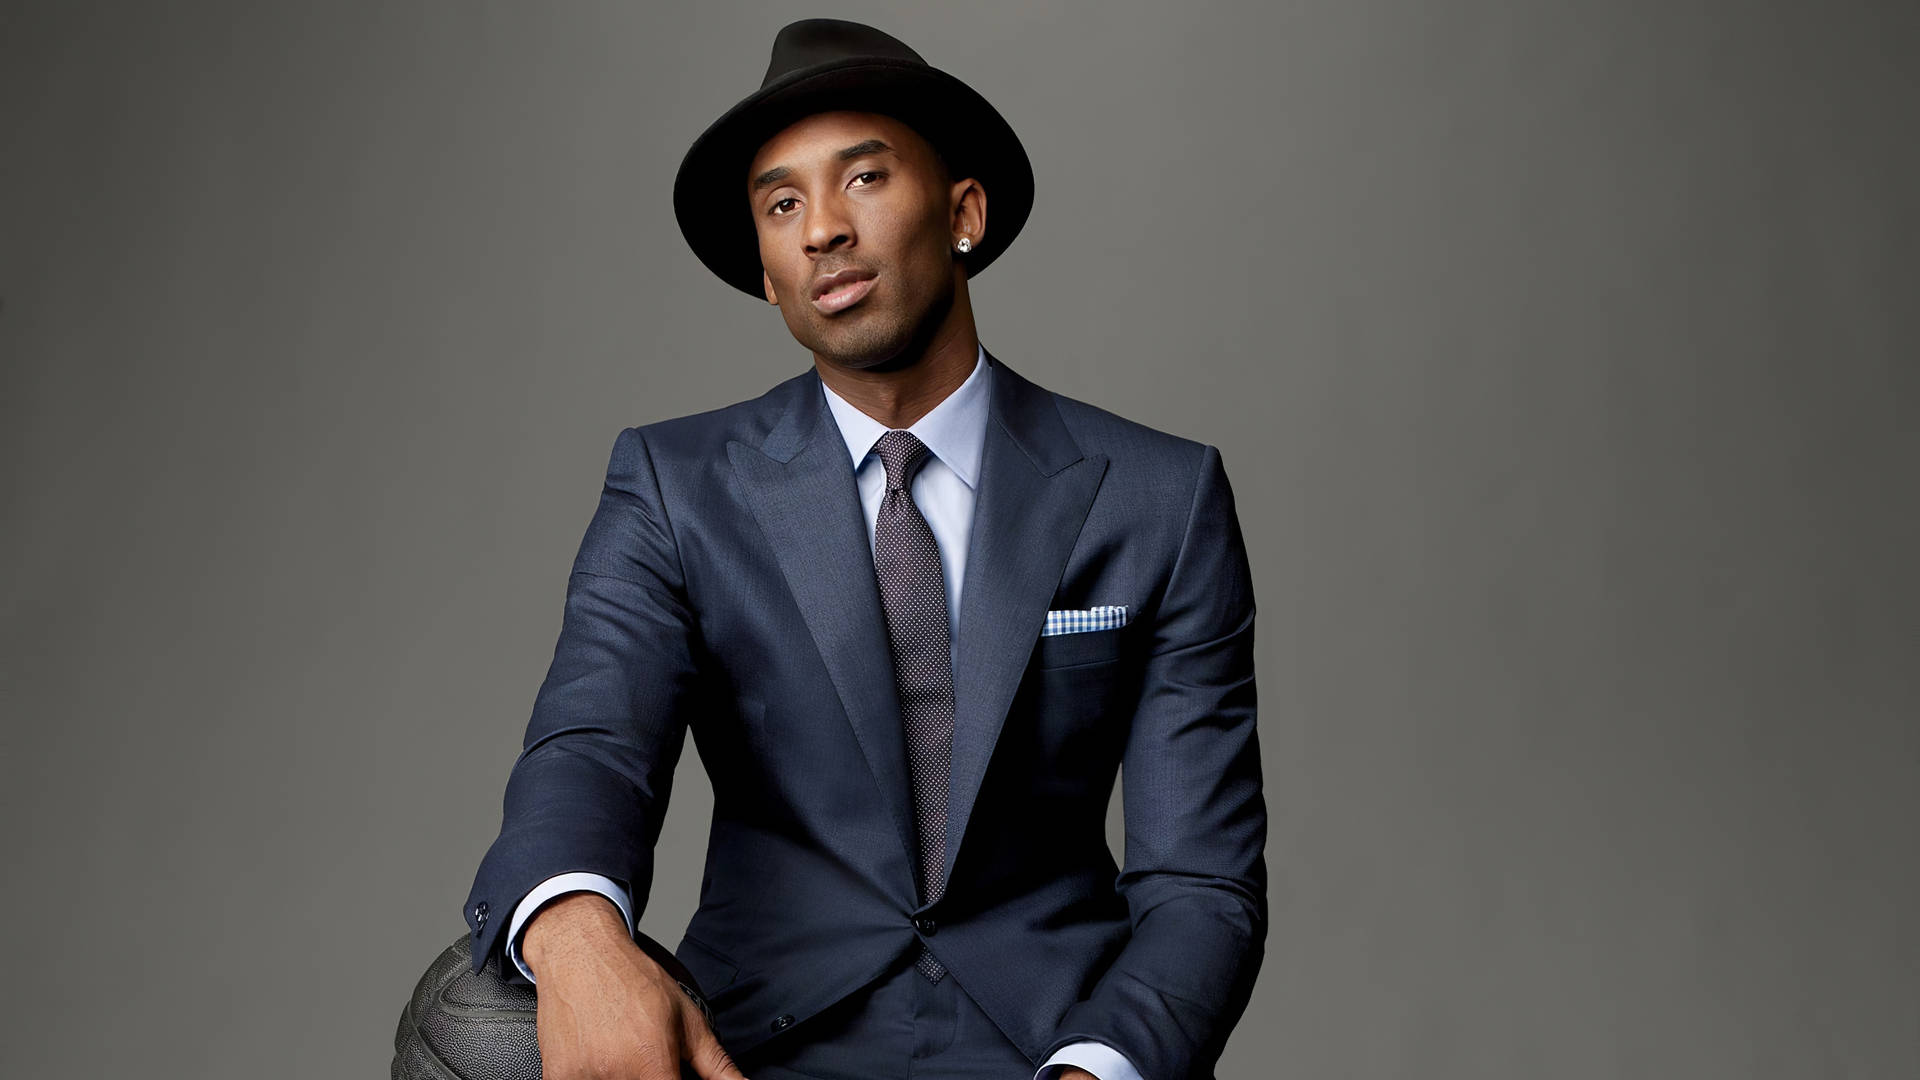 Kobe Bryant Is All Smiles In A Suit Background